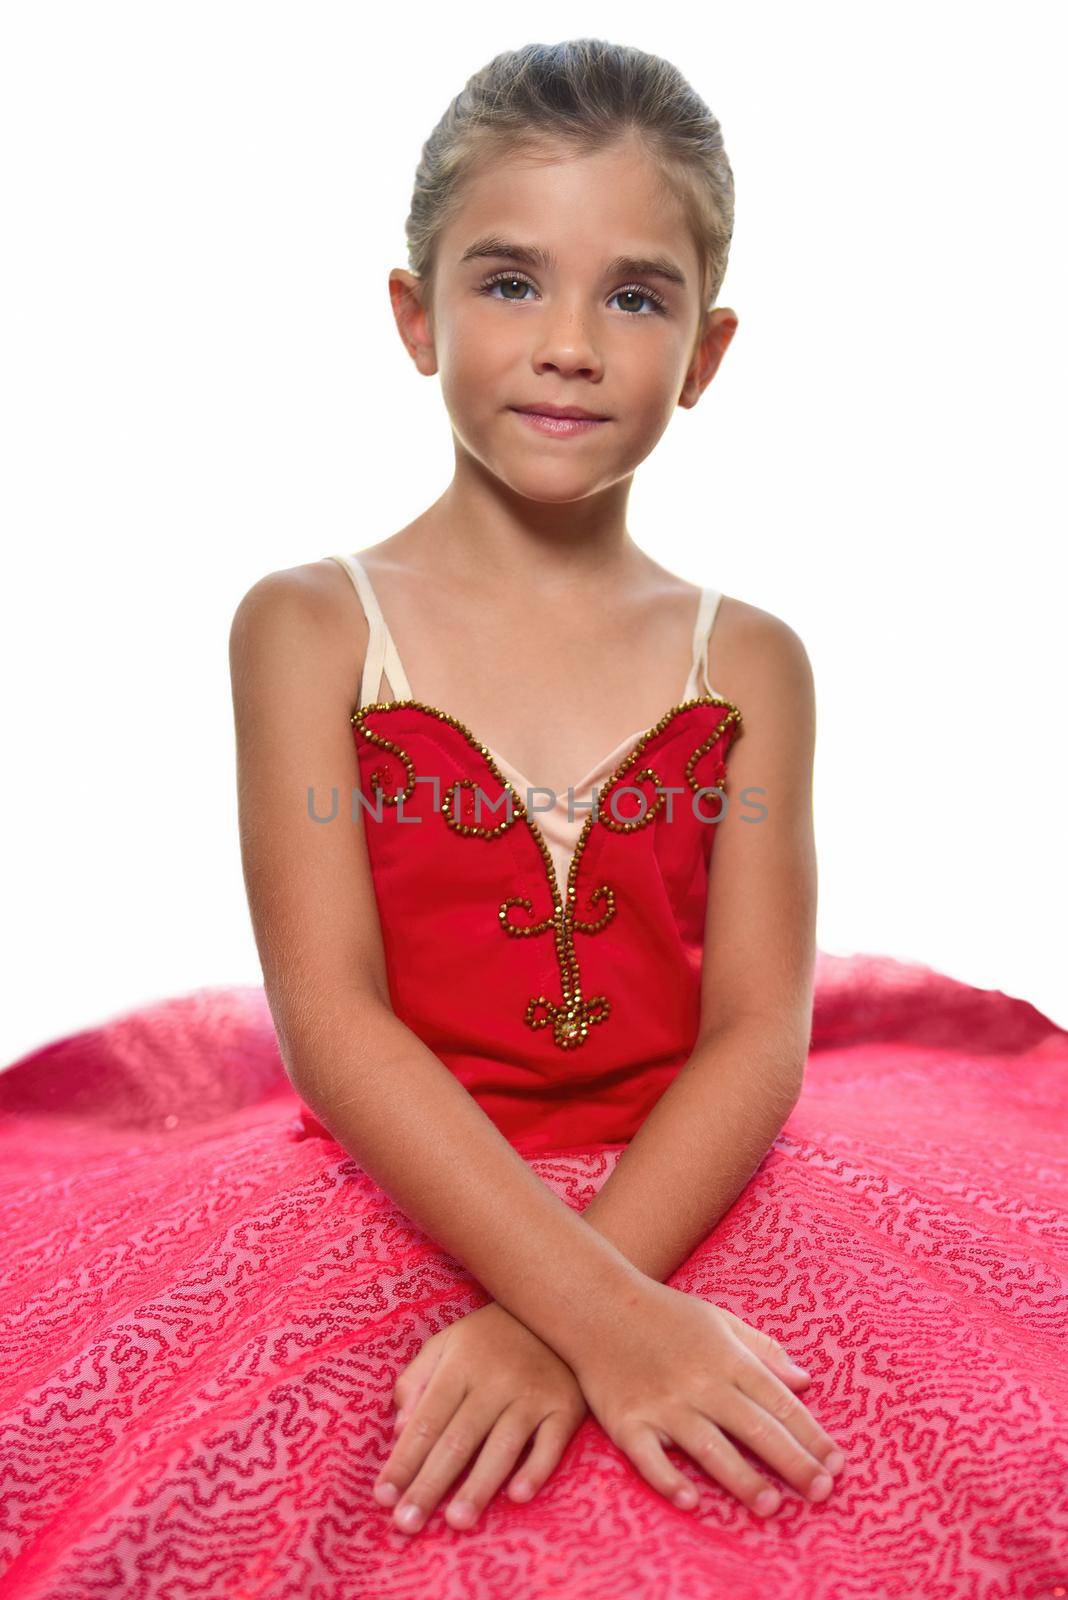 portrait of a beautiful little ballerina in a performance red dress dreaming to become professional ballet dancer. isolated on the white background